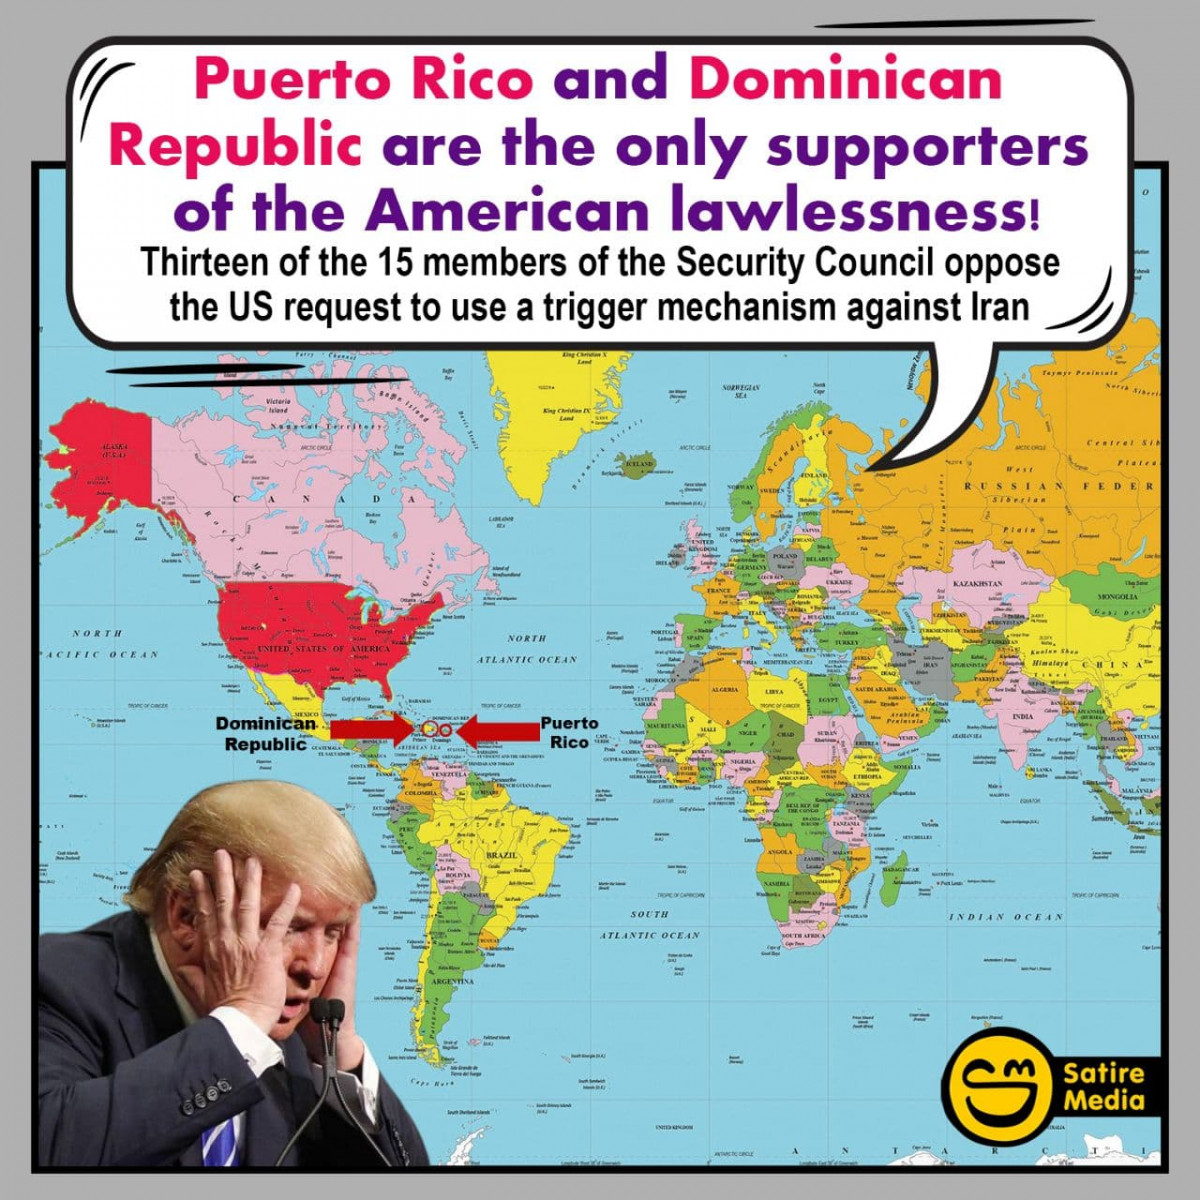 Puerto Rico and Dominican Republic are the only supporter s of the American lawlessness